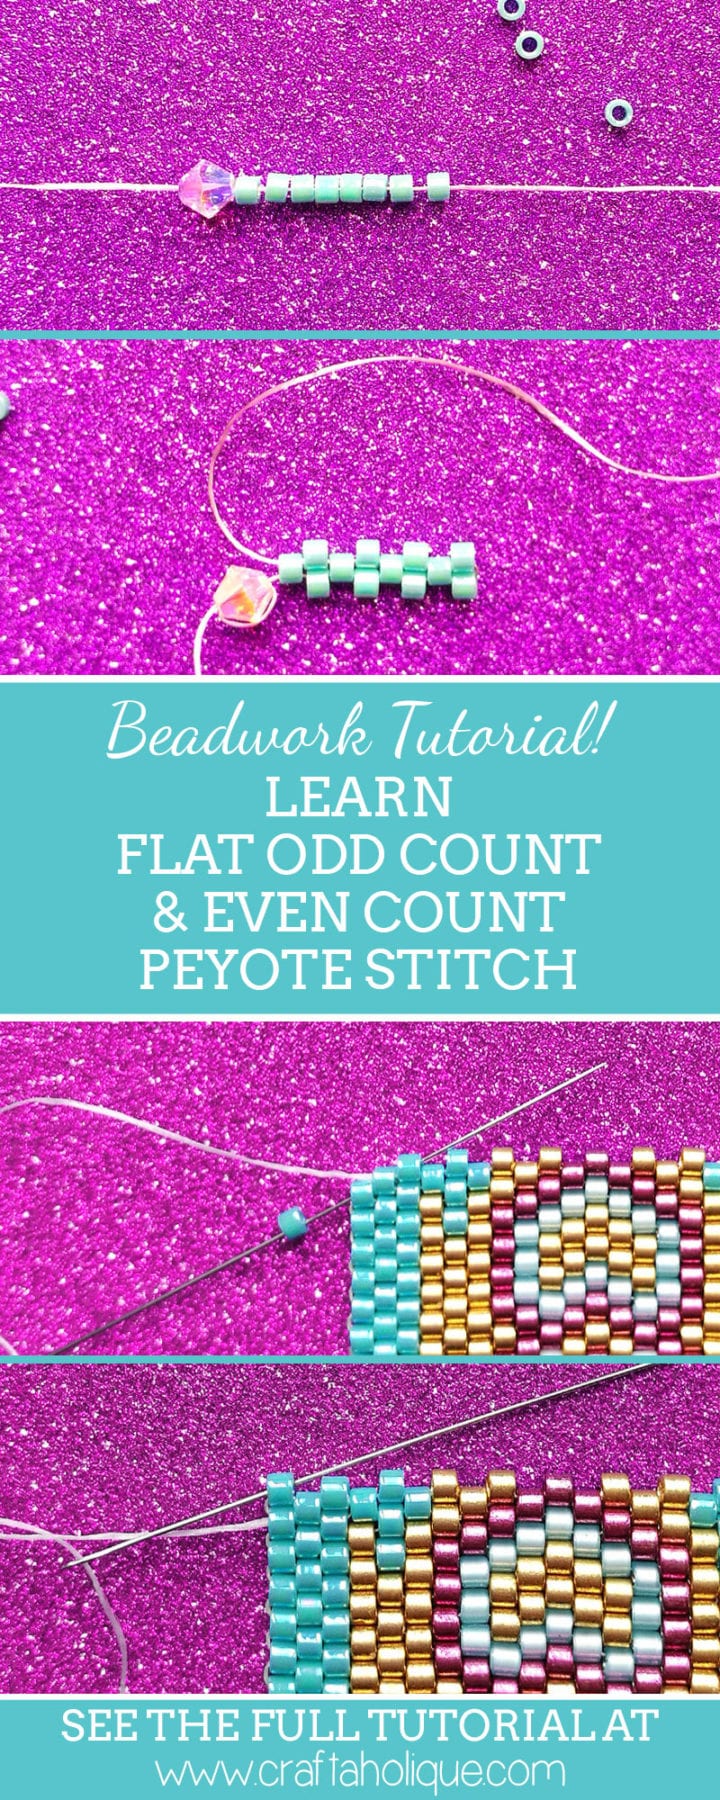 Flat even count and flat odd count peyote stitch tutorial from Craftaholique. Beadwork techniques.